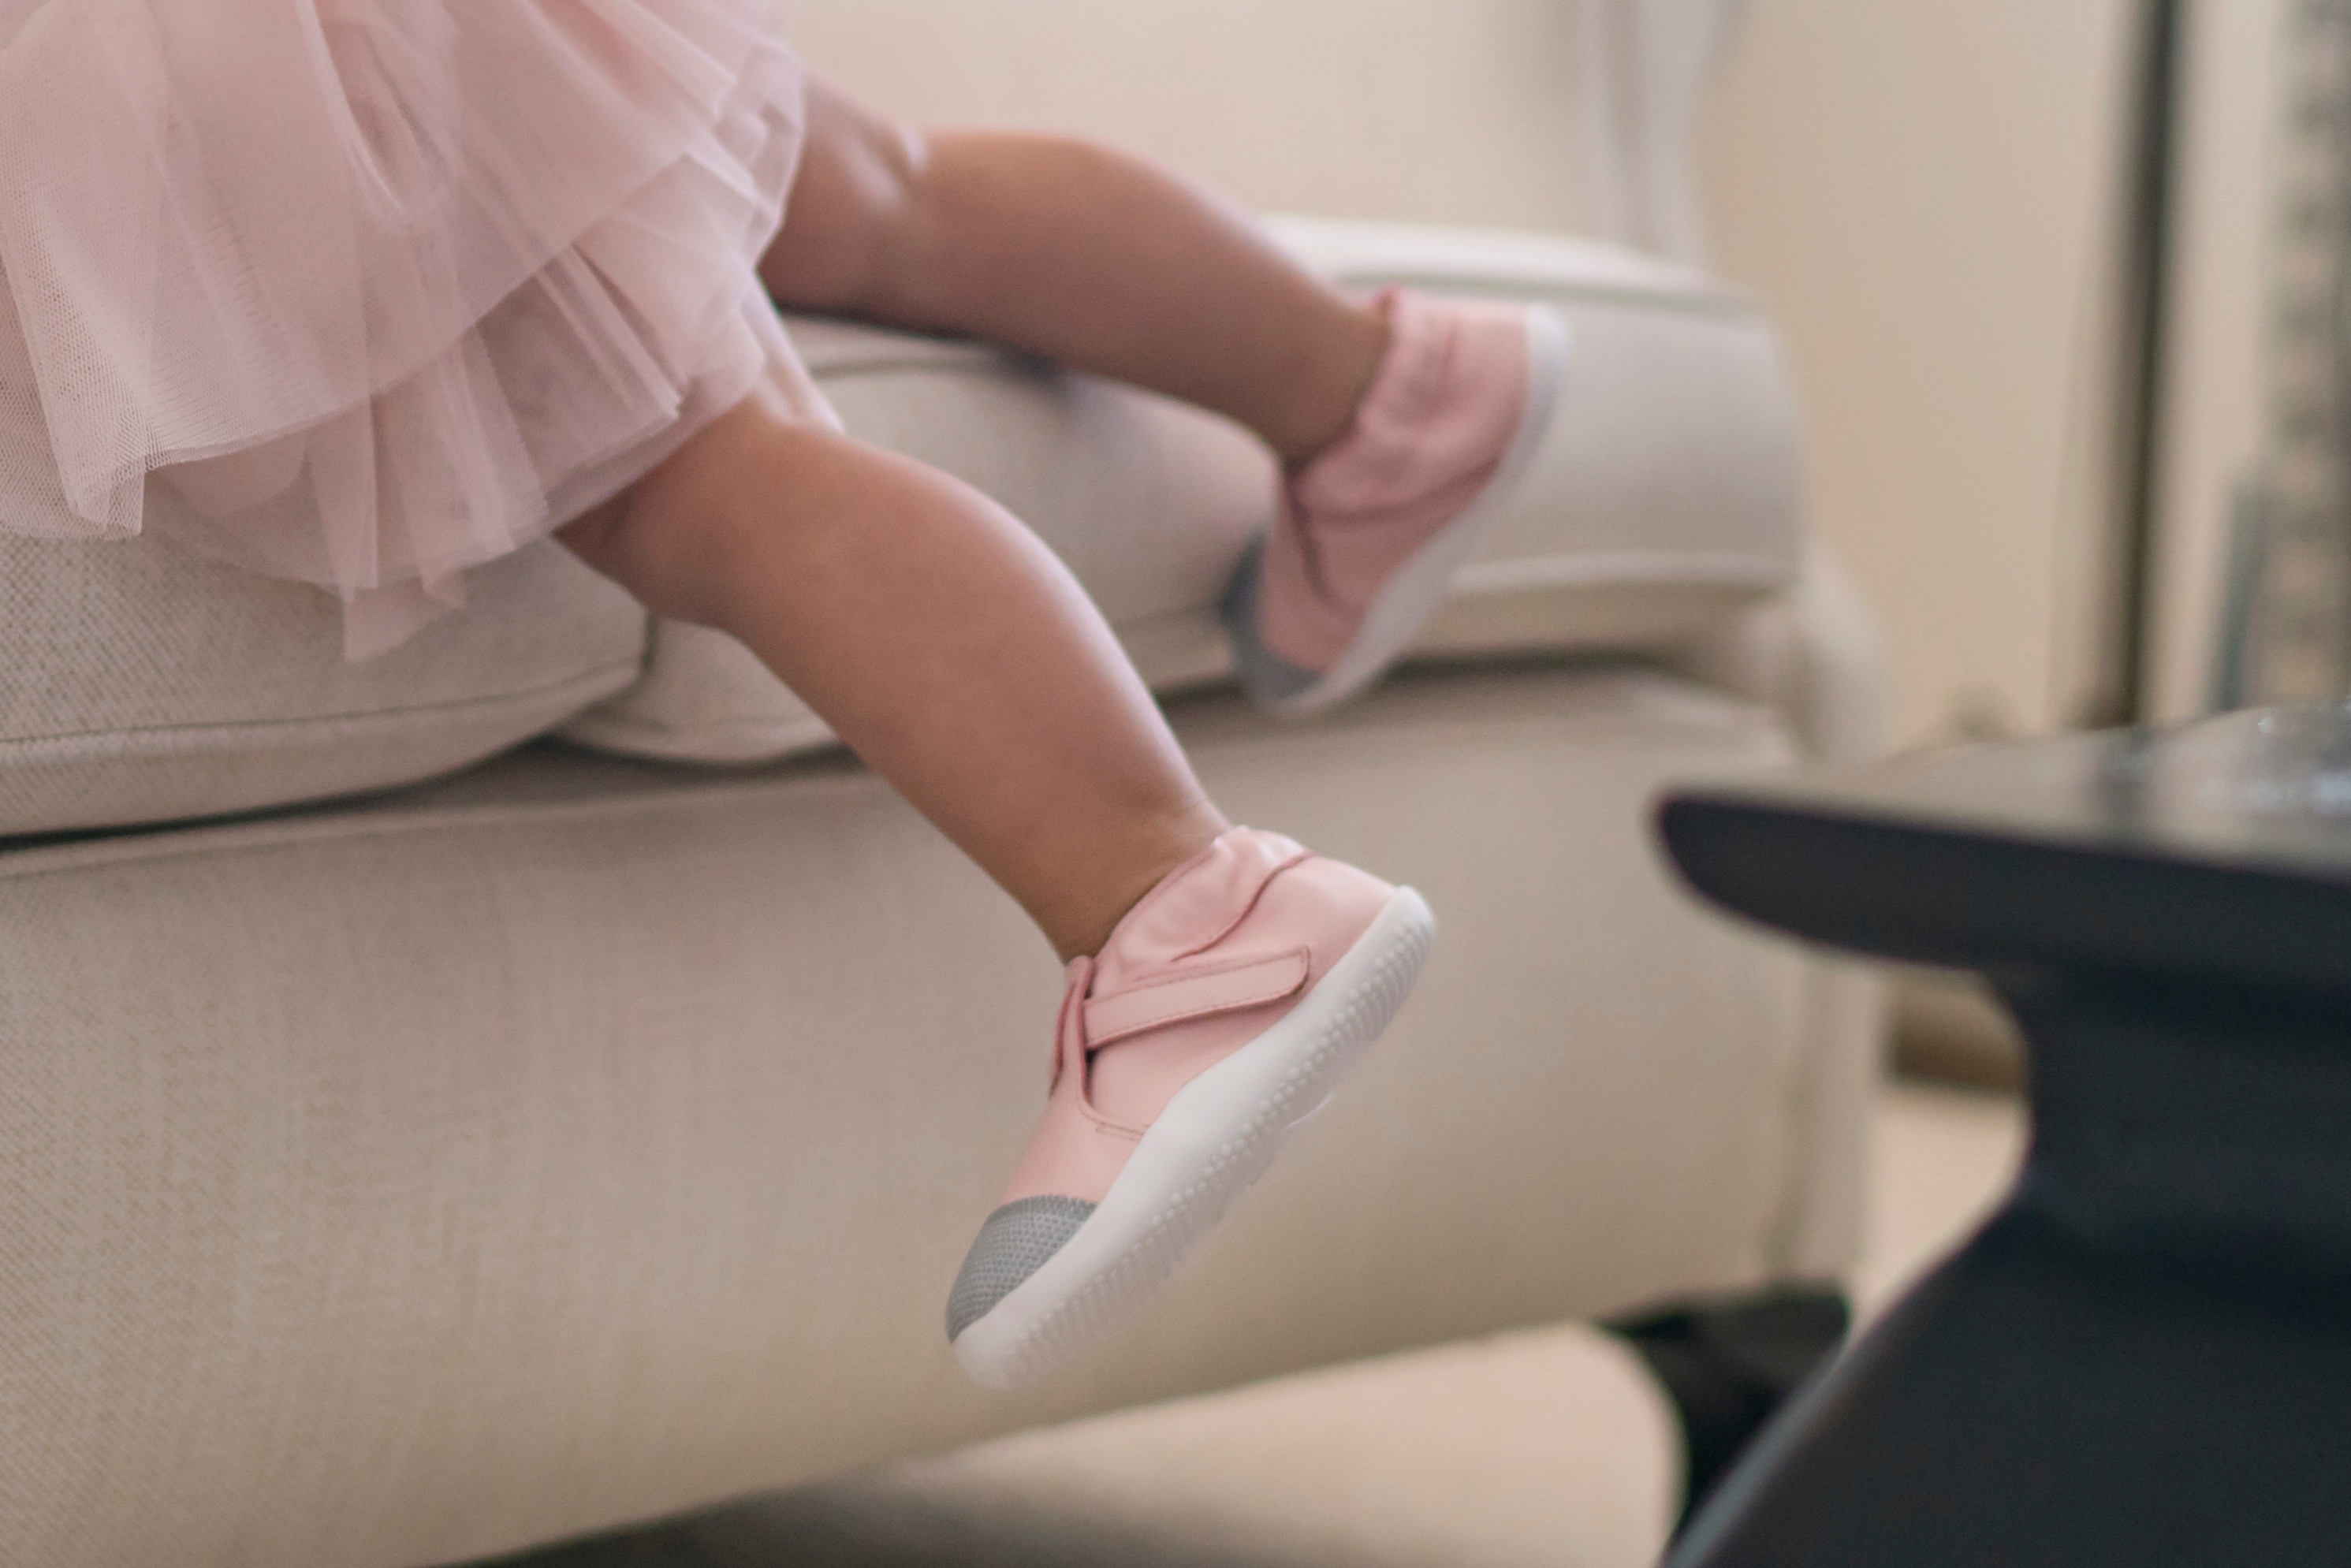 Infant and toddler footwear. Why is it so hard?